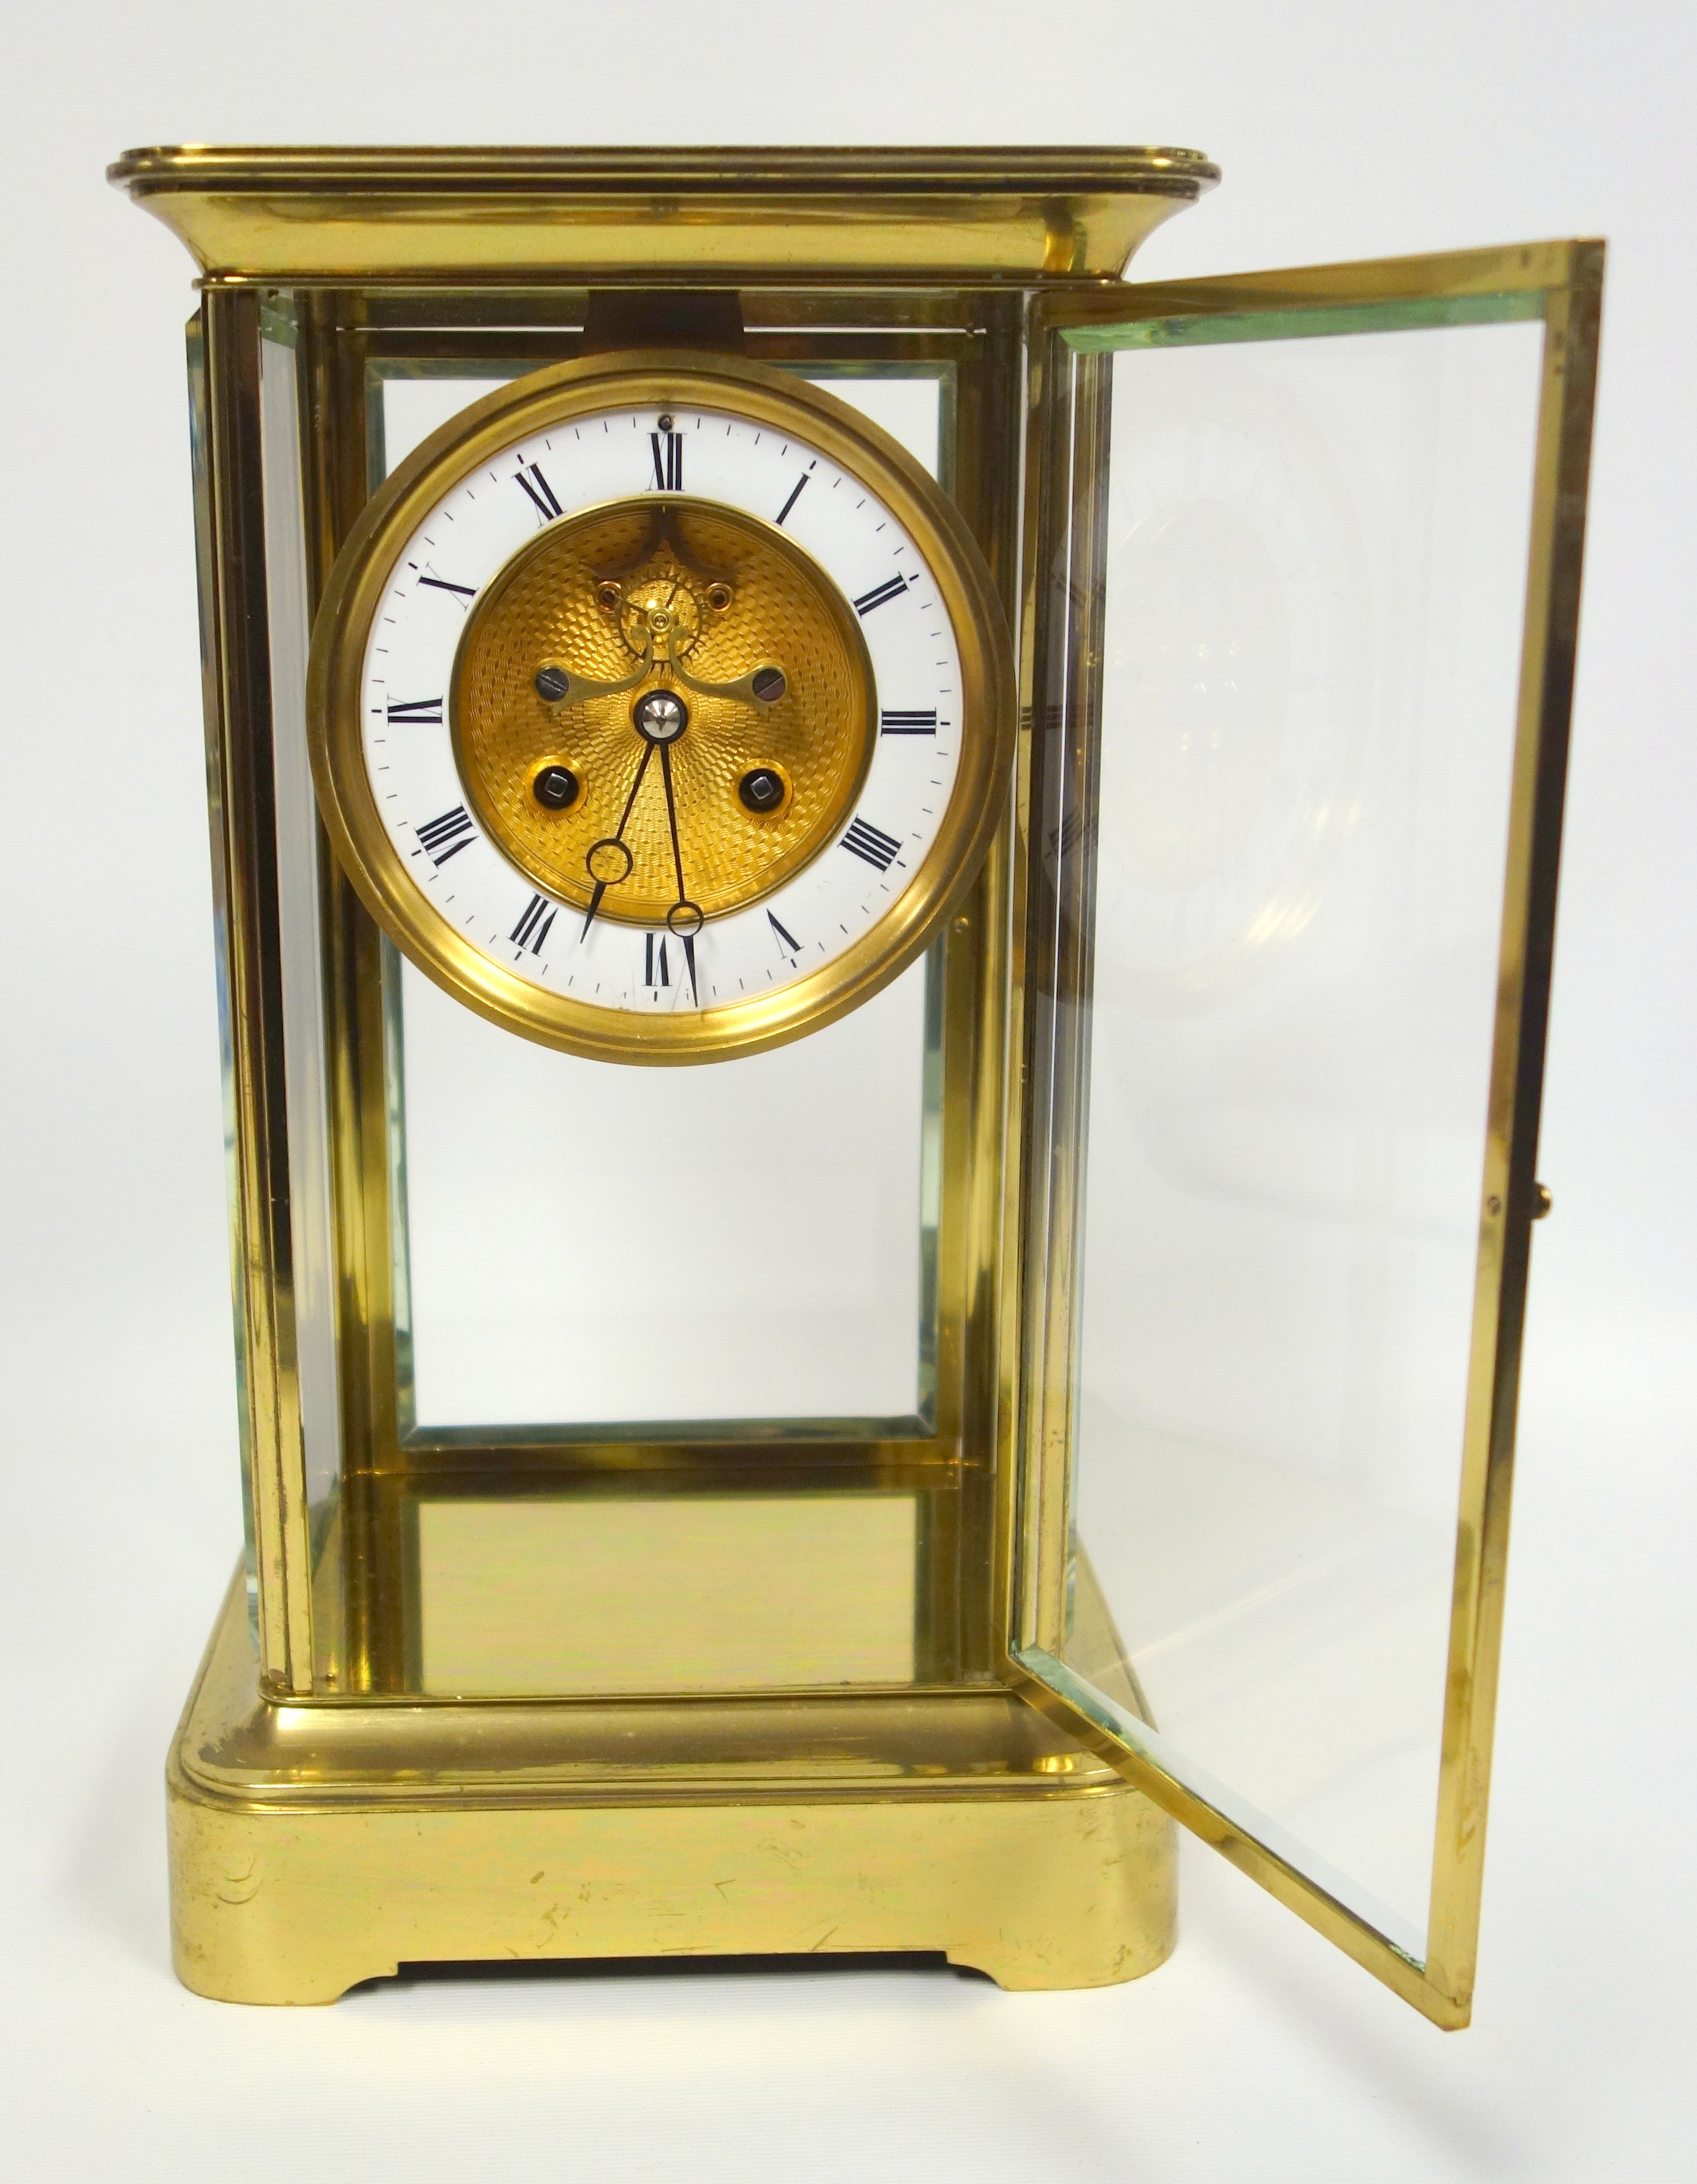 Late 19th century 4-glass clock with a gilt circular dial with visible escapement, white enamelled - Image 3 of 8